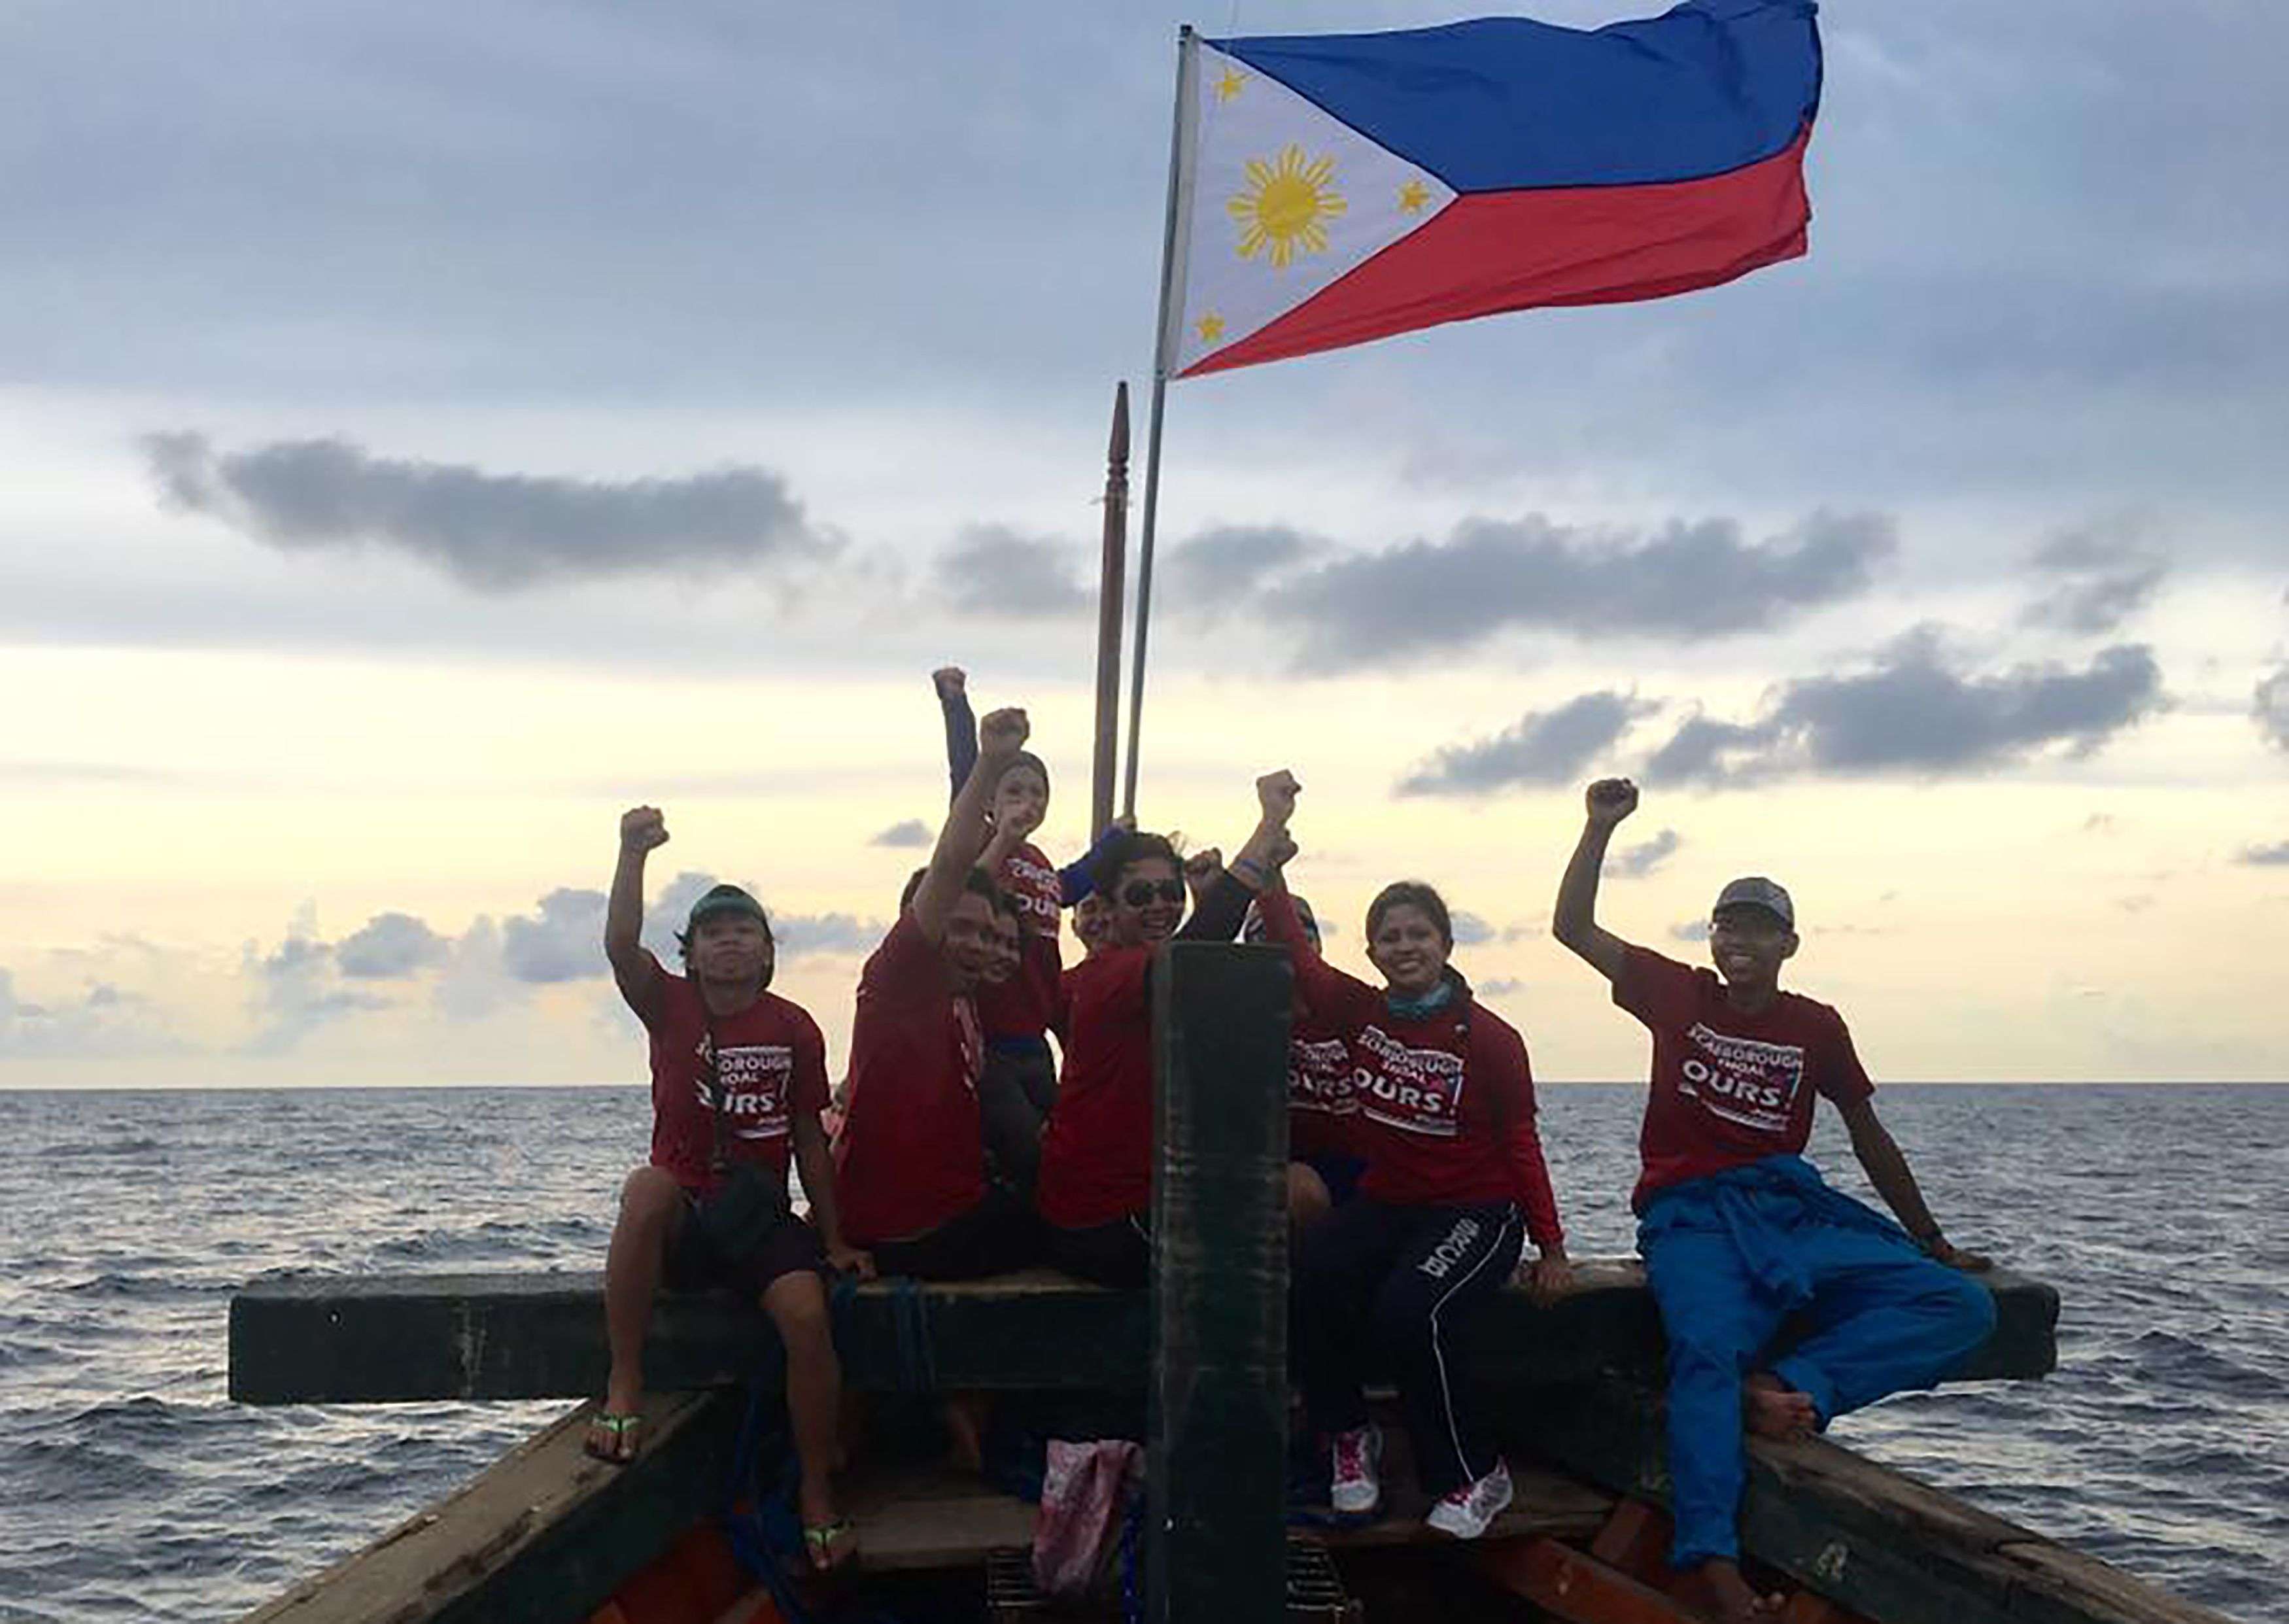 Filipino activists pose for a photo at the Chinese-controlled Scarborough Shoal in the South China Sea. Photo: AFP